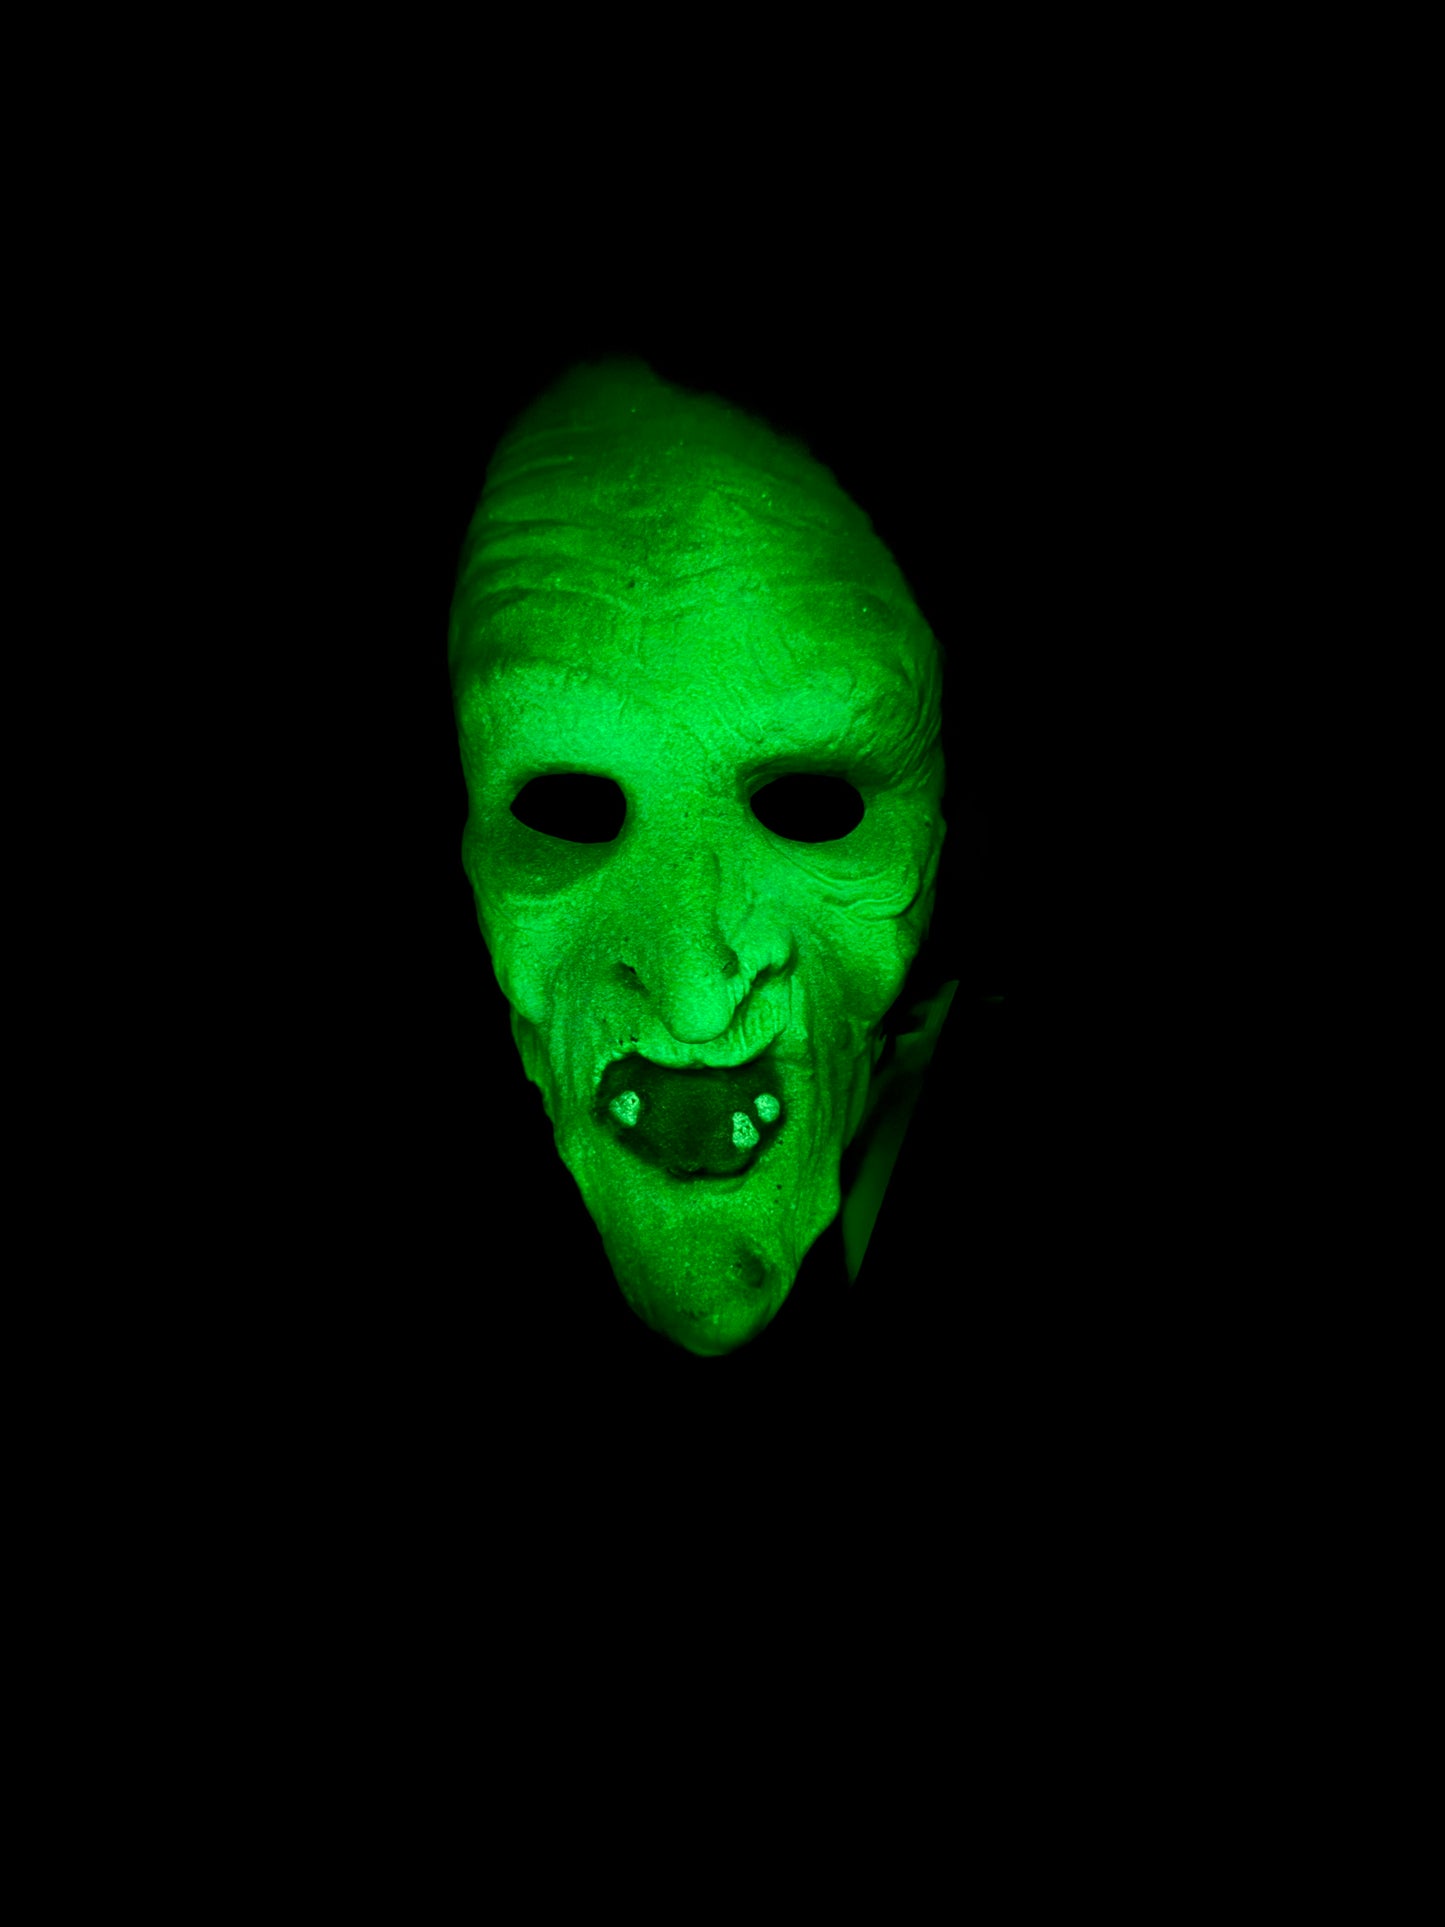 HALLOWEEN III SEASON OF THE WITCH - GLOW IN THE DARK WITCH MASK